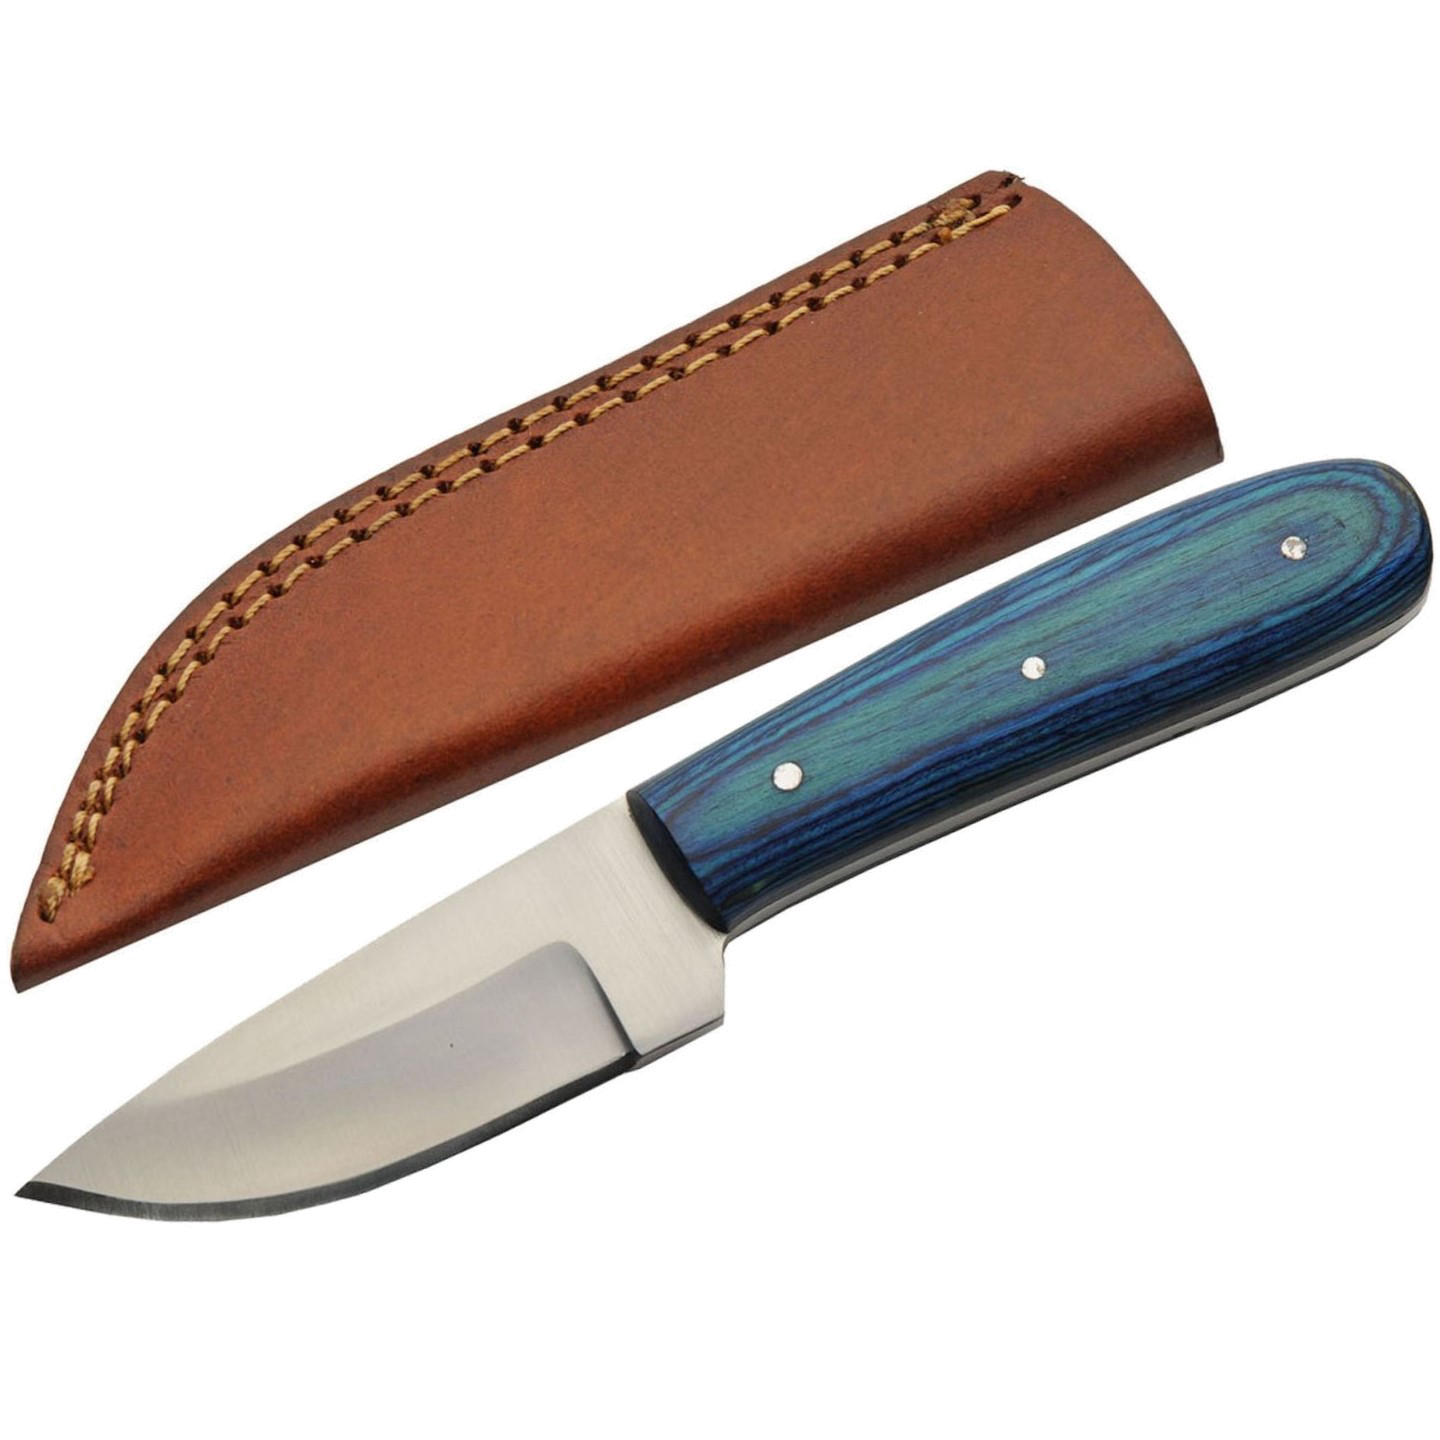 product image for Rite-Edge Compact Hunting Knife Stainless Steel Drop Point Blade Blue Wood Handle Model RE-101